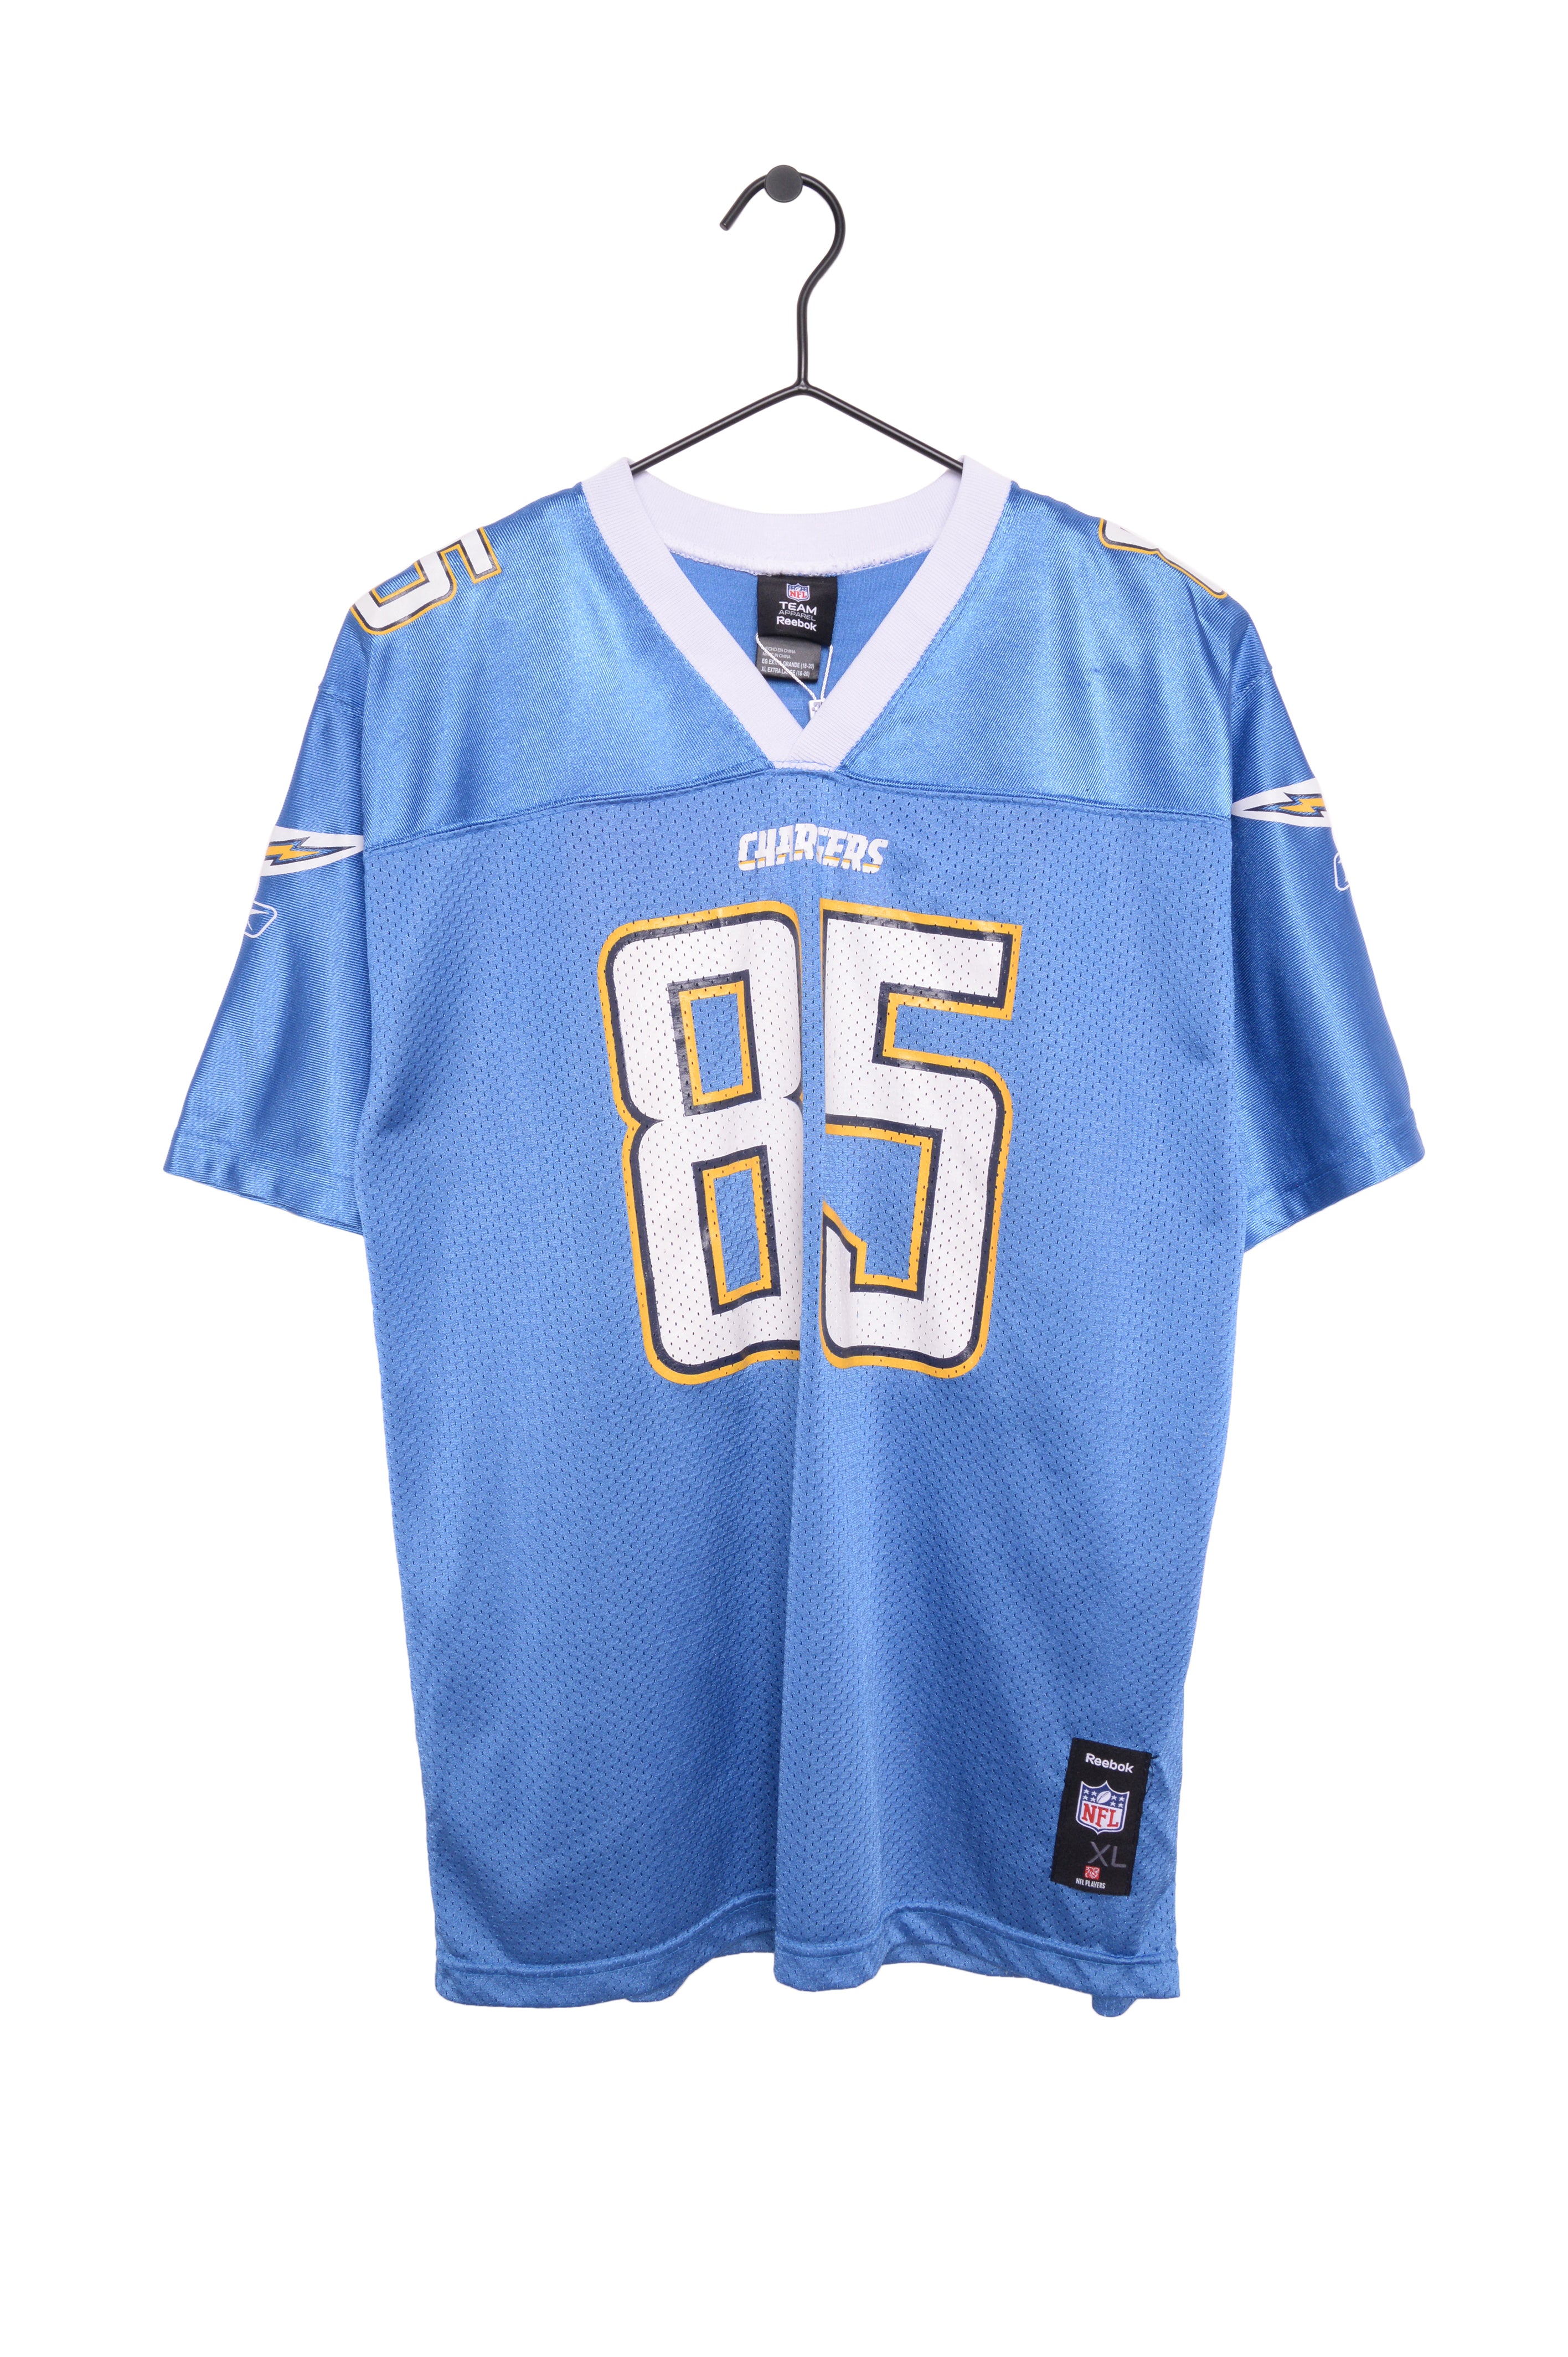 Los Angeles Chargers Jerseys, Chargers Jersey, Throwback & Color